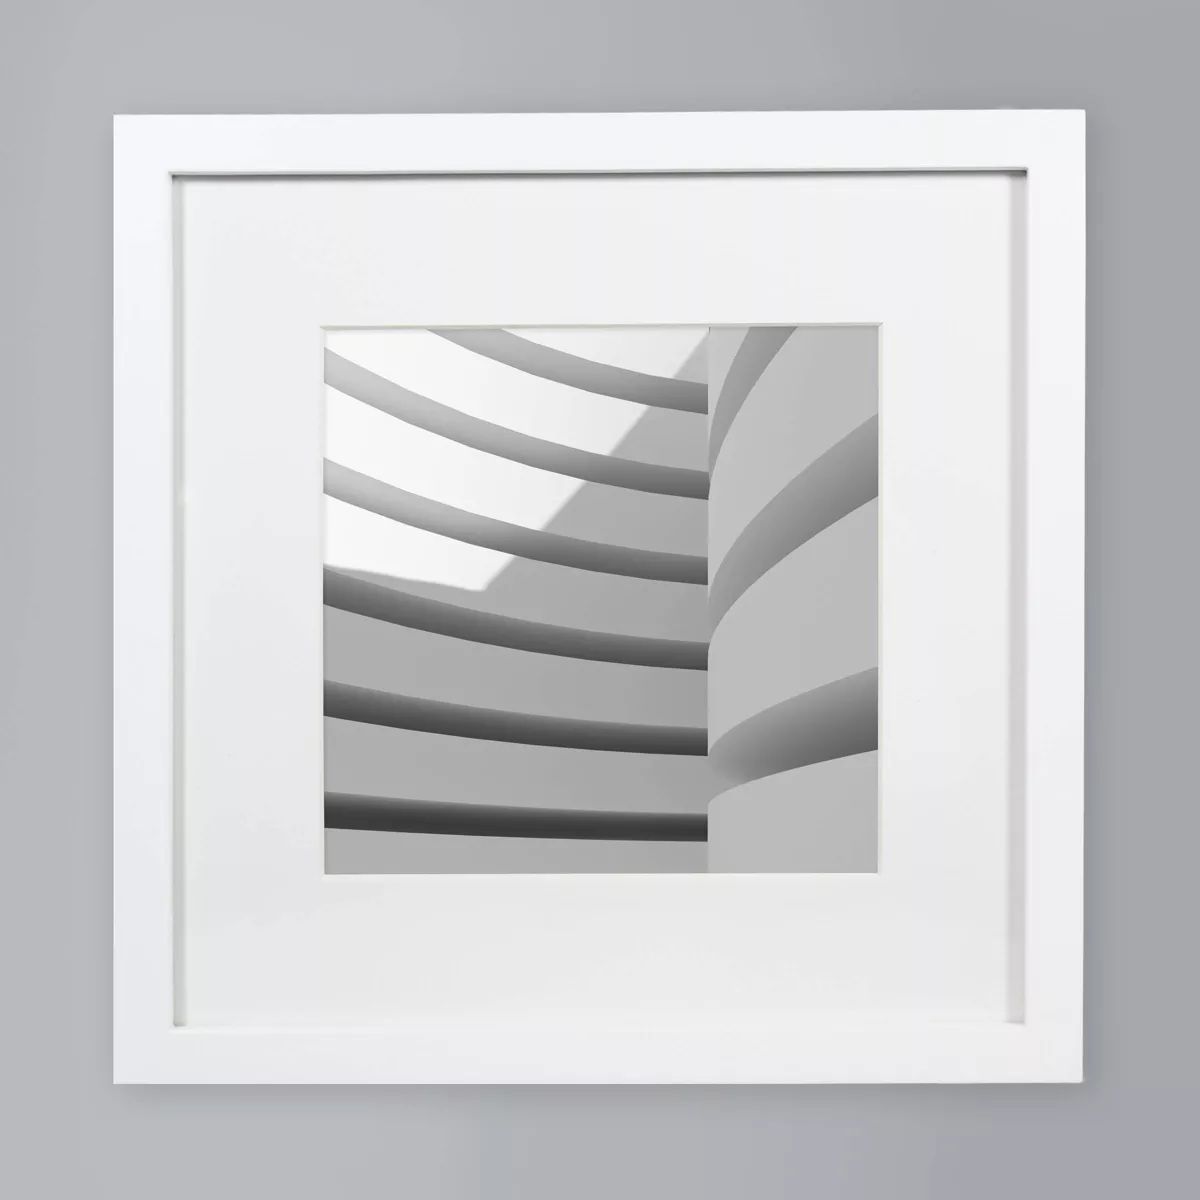 12" x 12" Matted to 8" x 8" Thin Gallery Frame - Room Essentials™ | Target